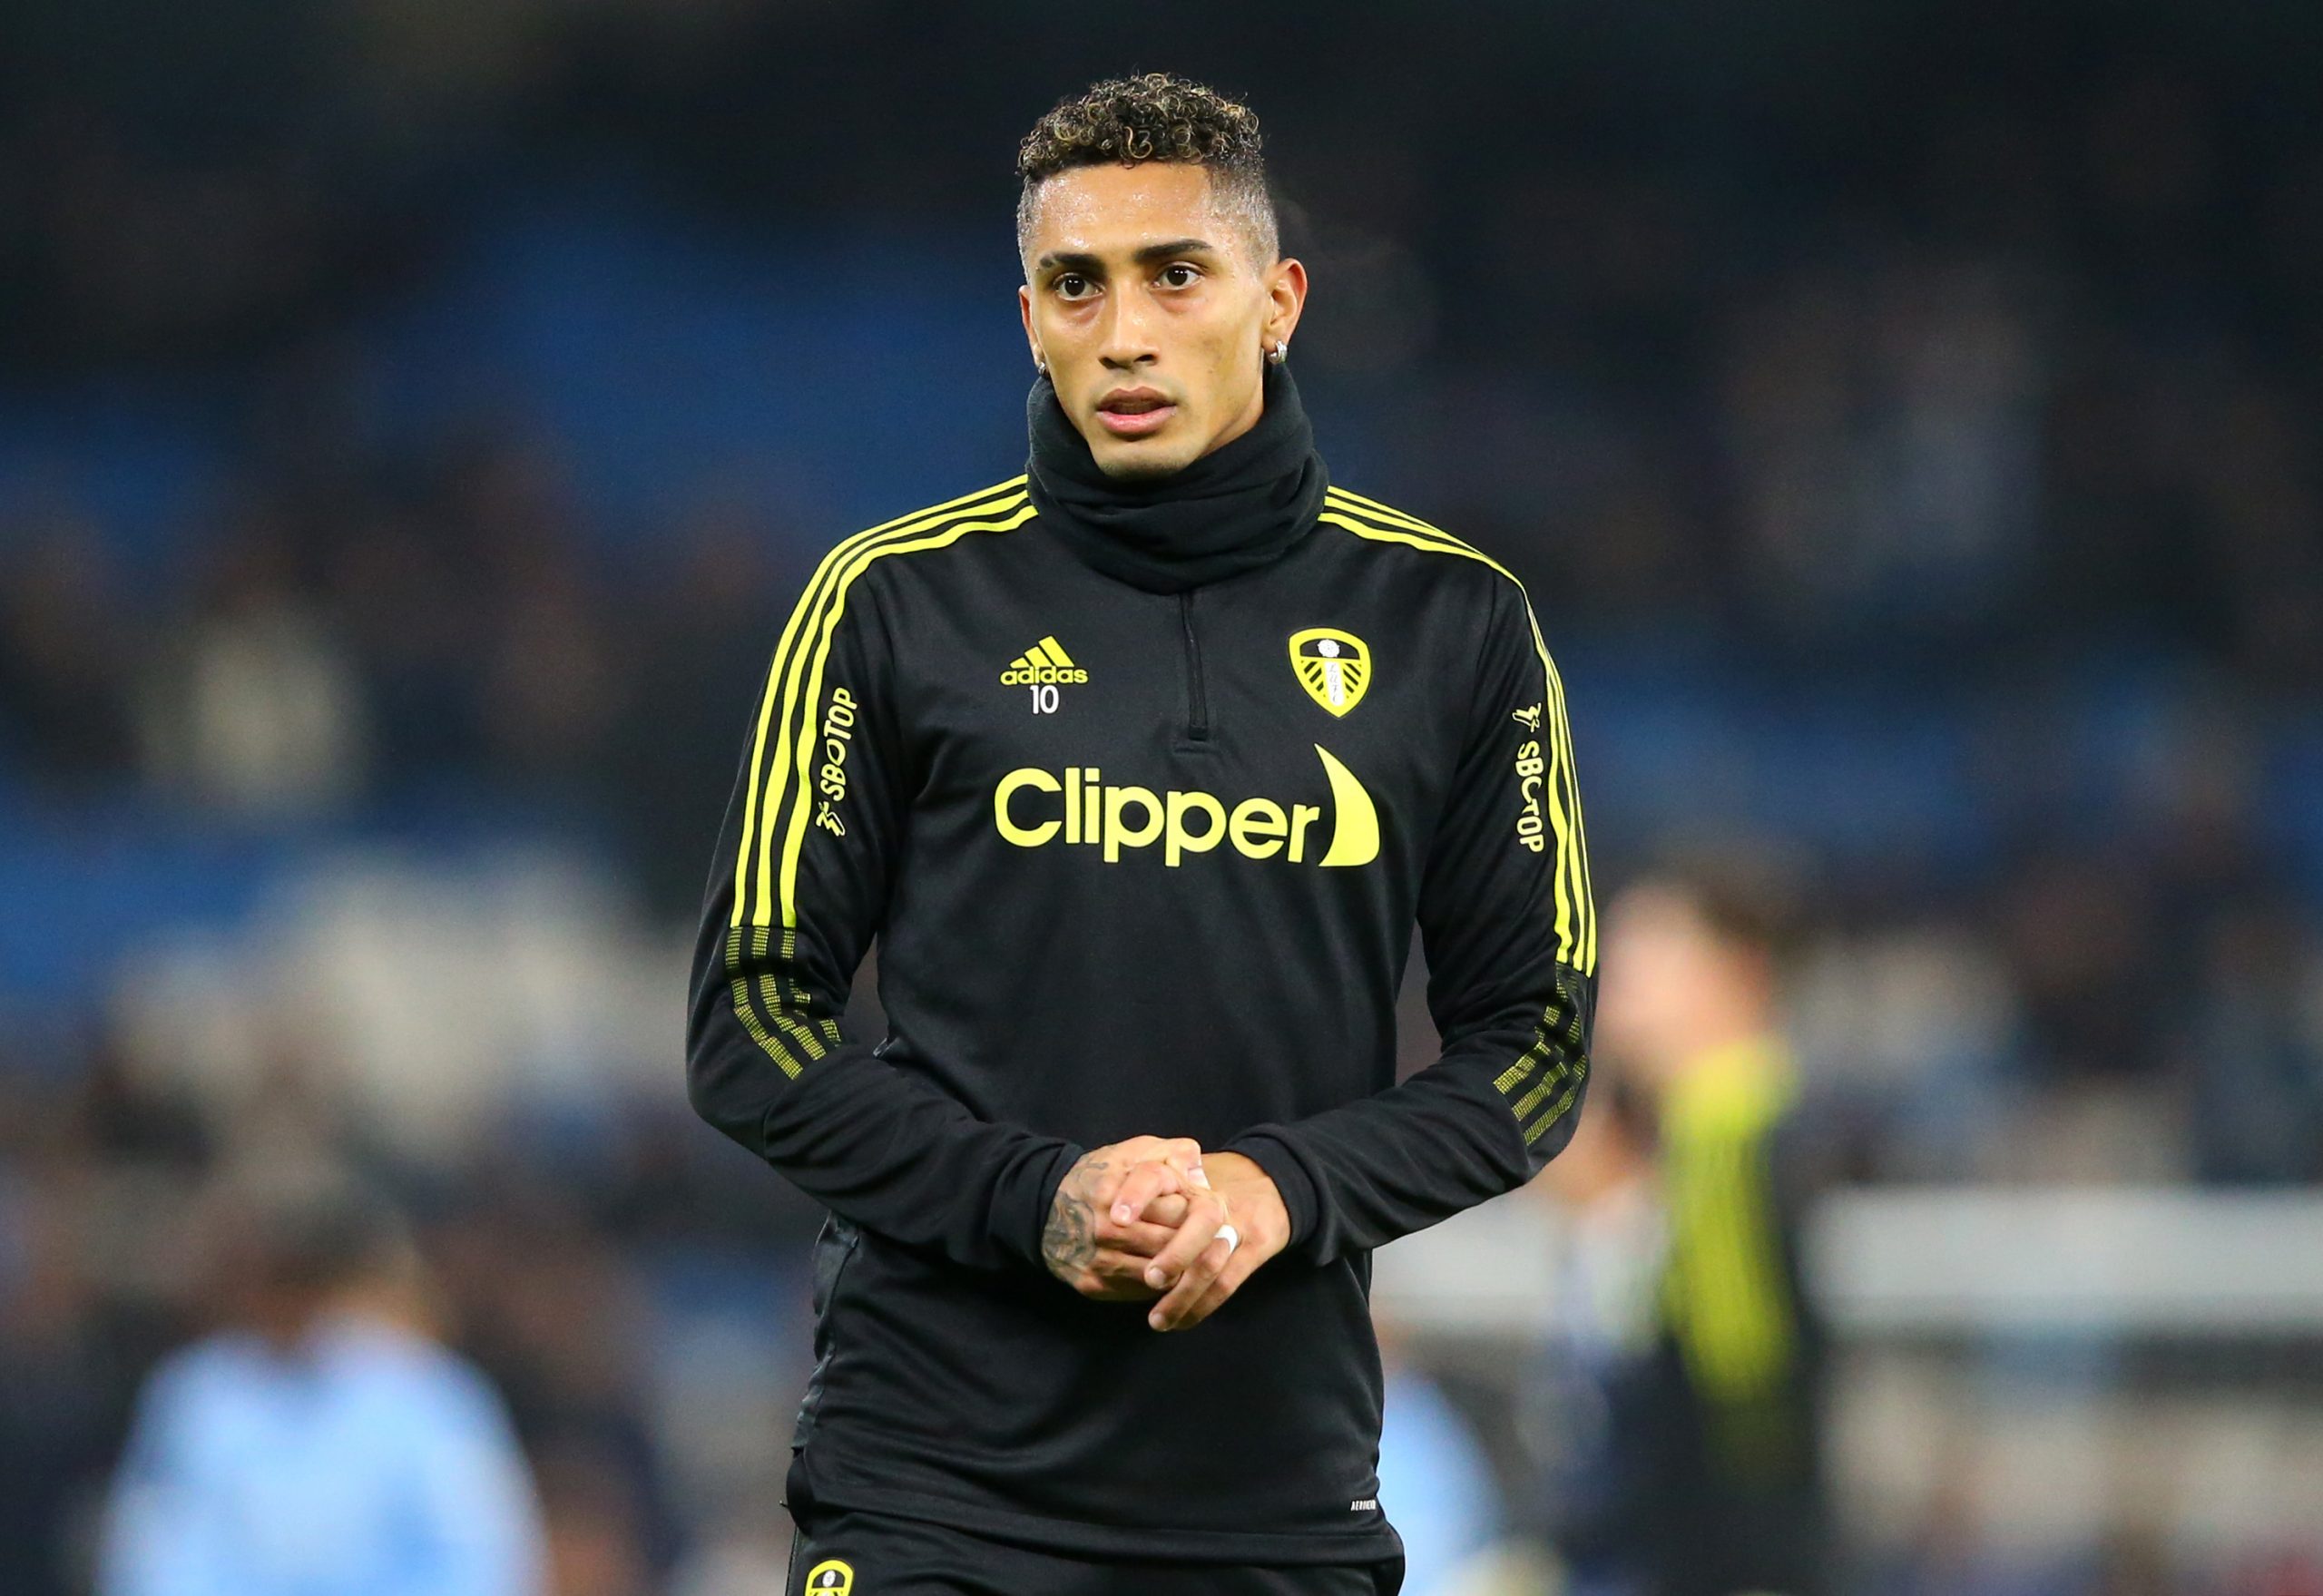 Leeds United did not want to sell Raphinha to Manchester United.